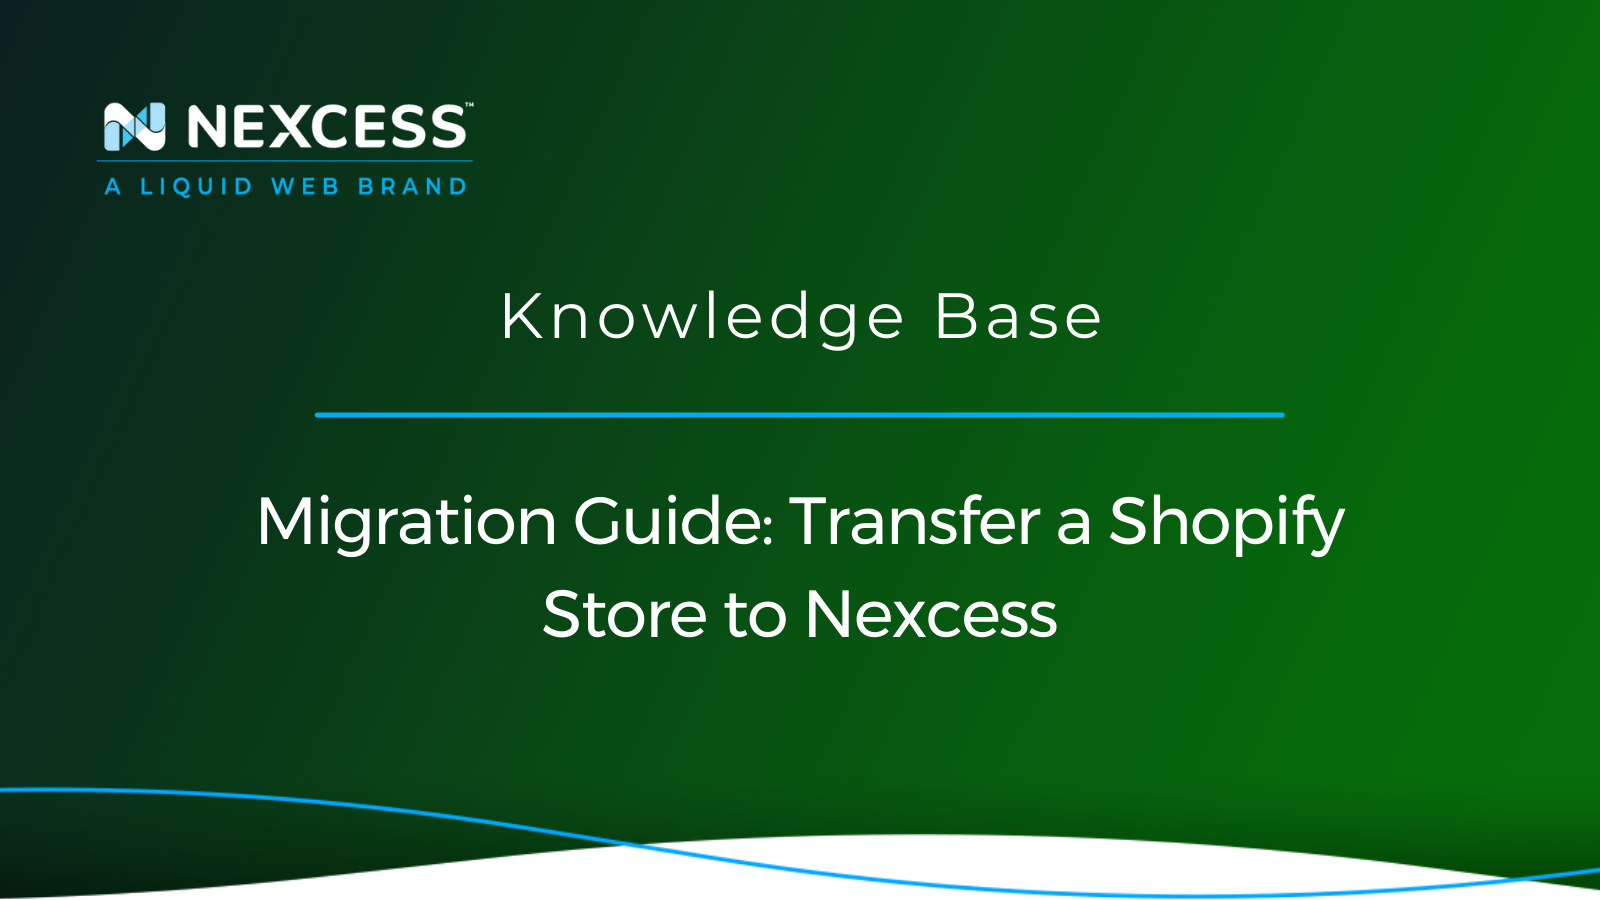 Migration Guide: Transfer a Shopify Store to Nexcess